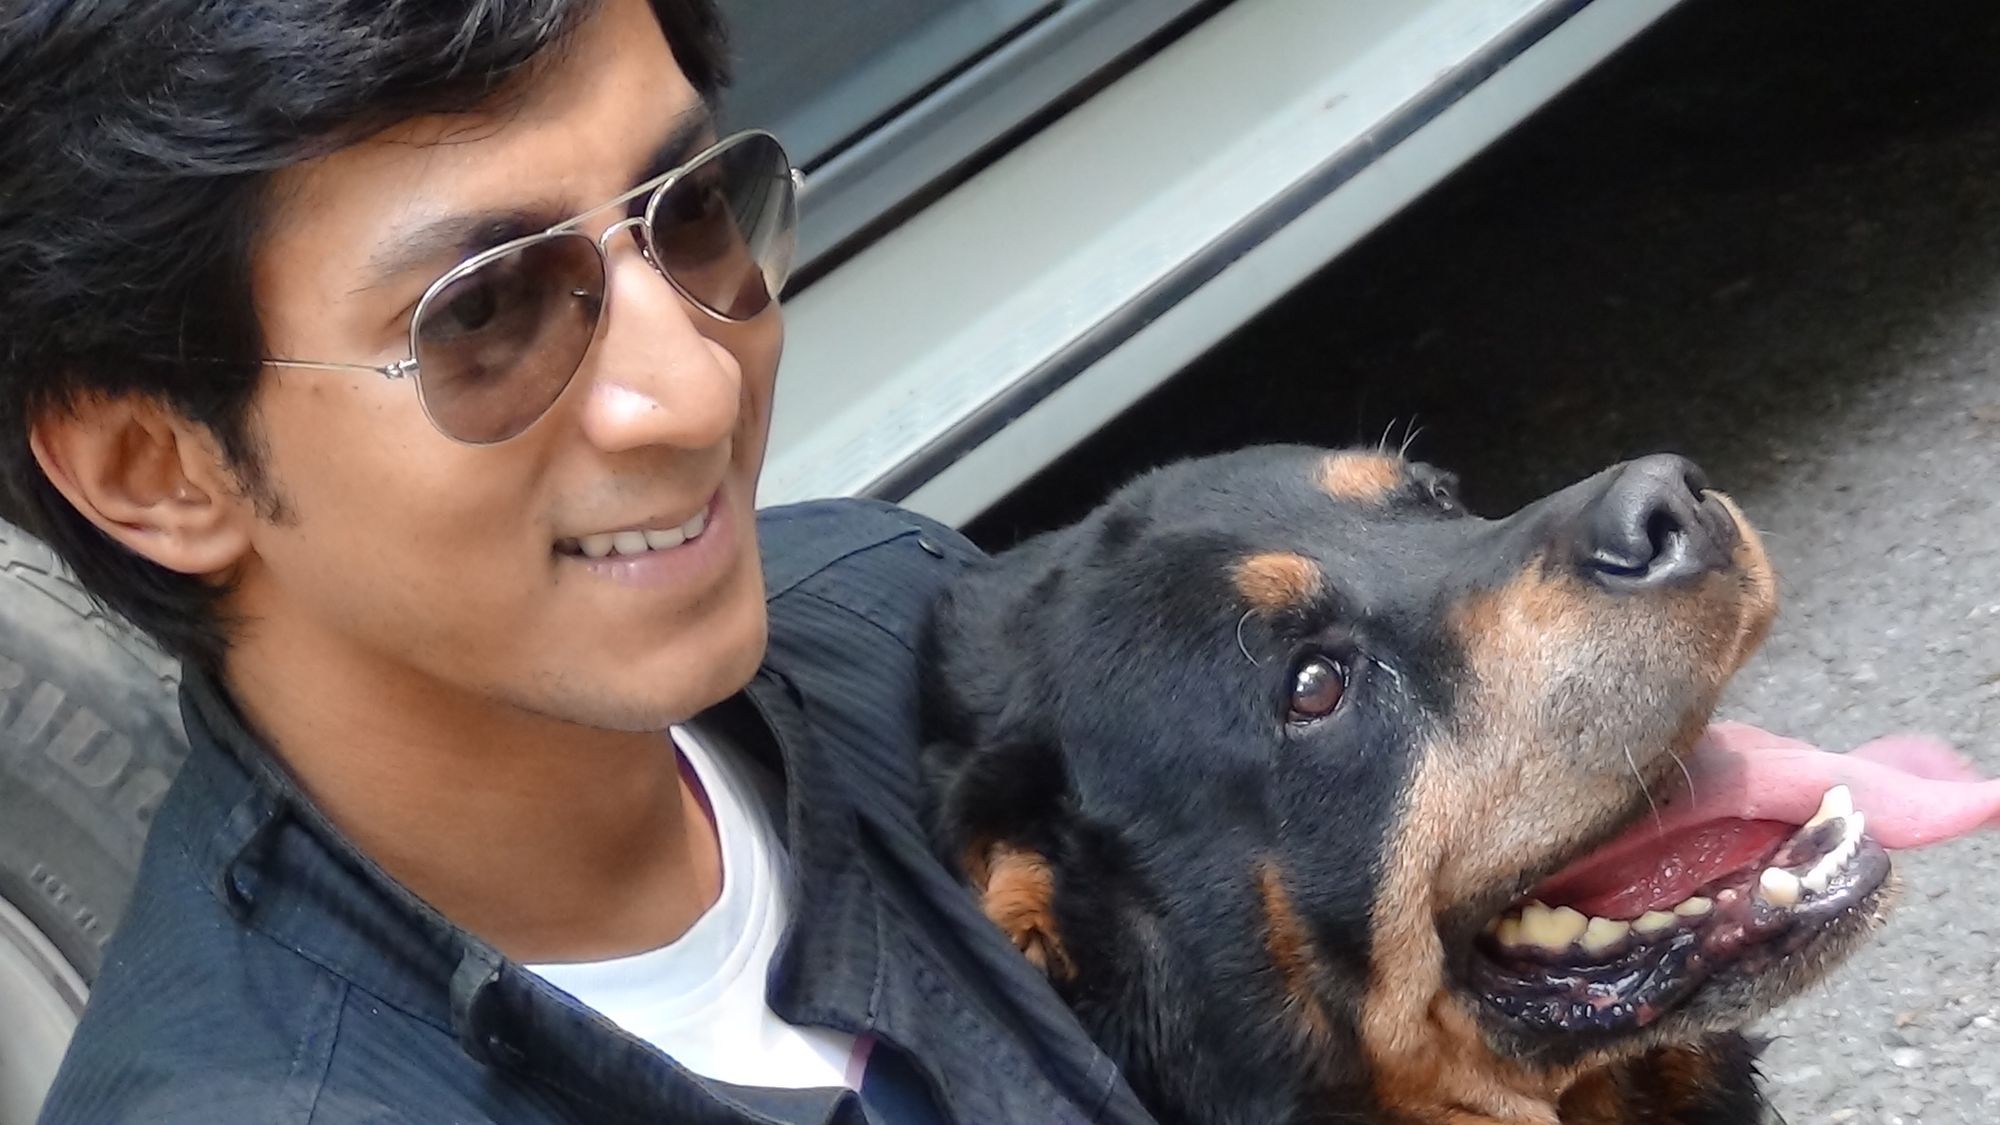 Anshuman and the Rottweiler